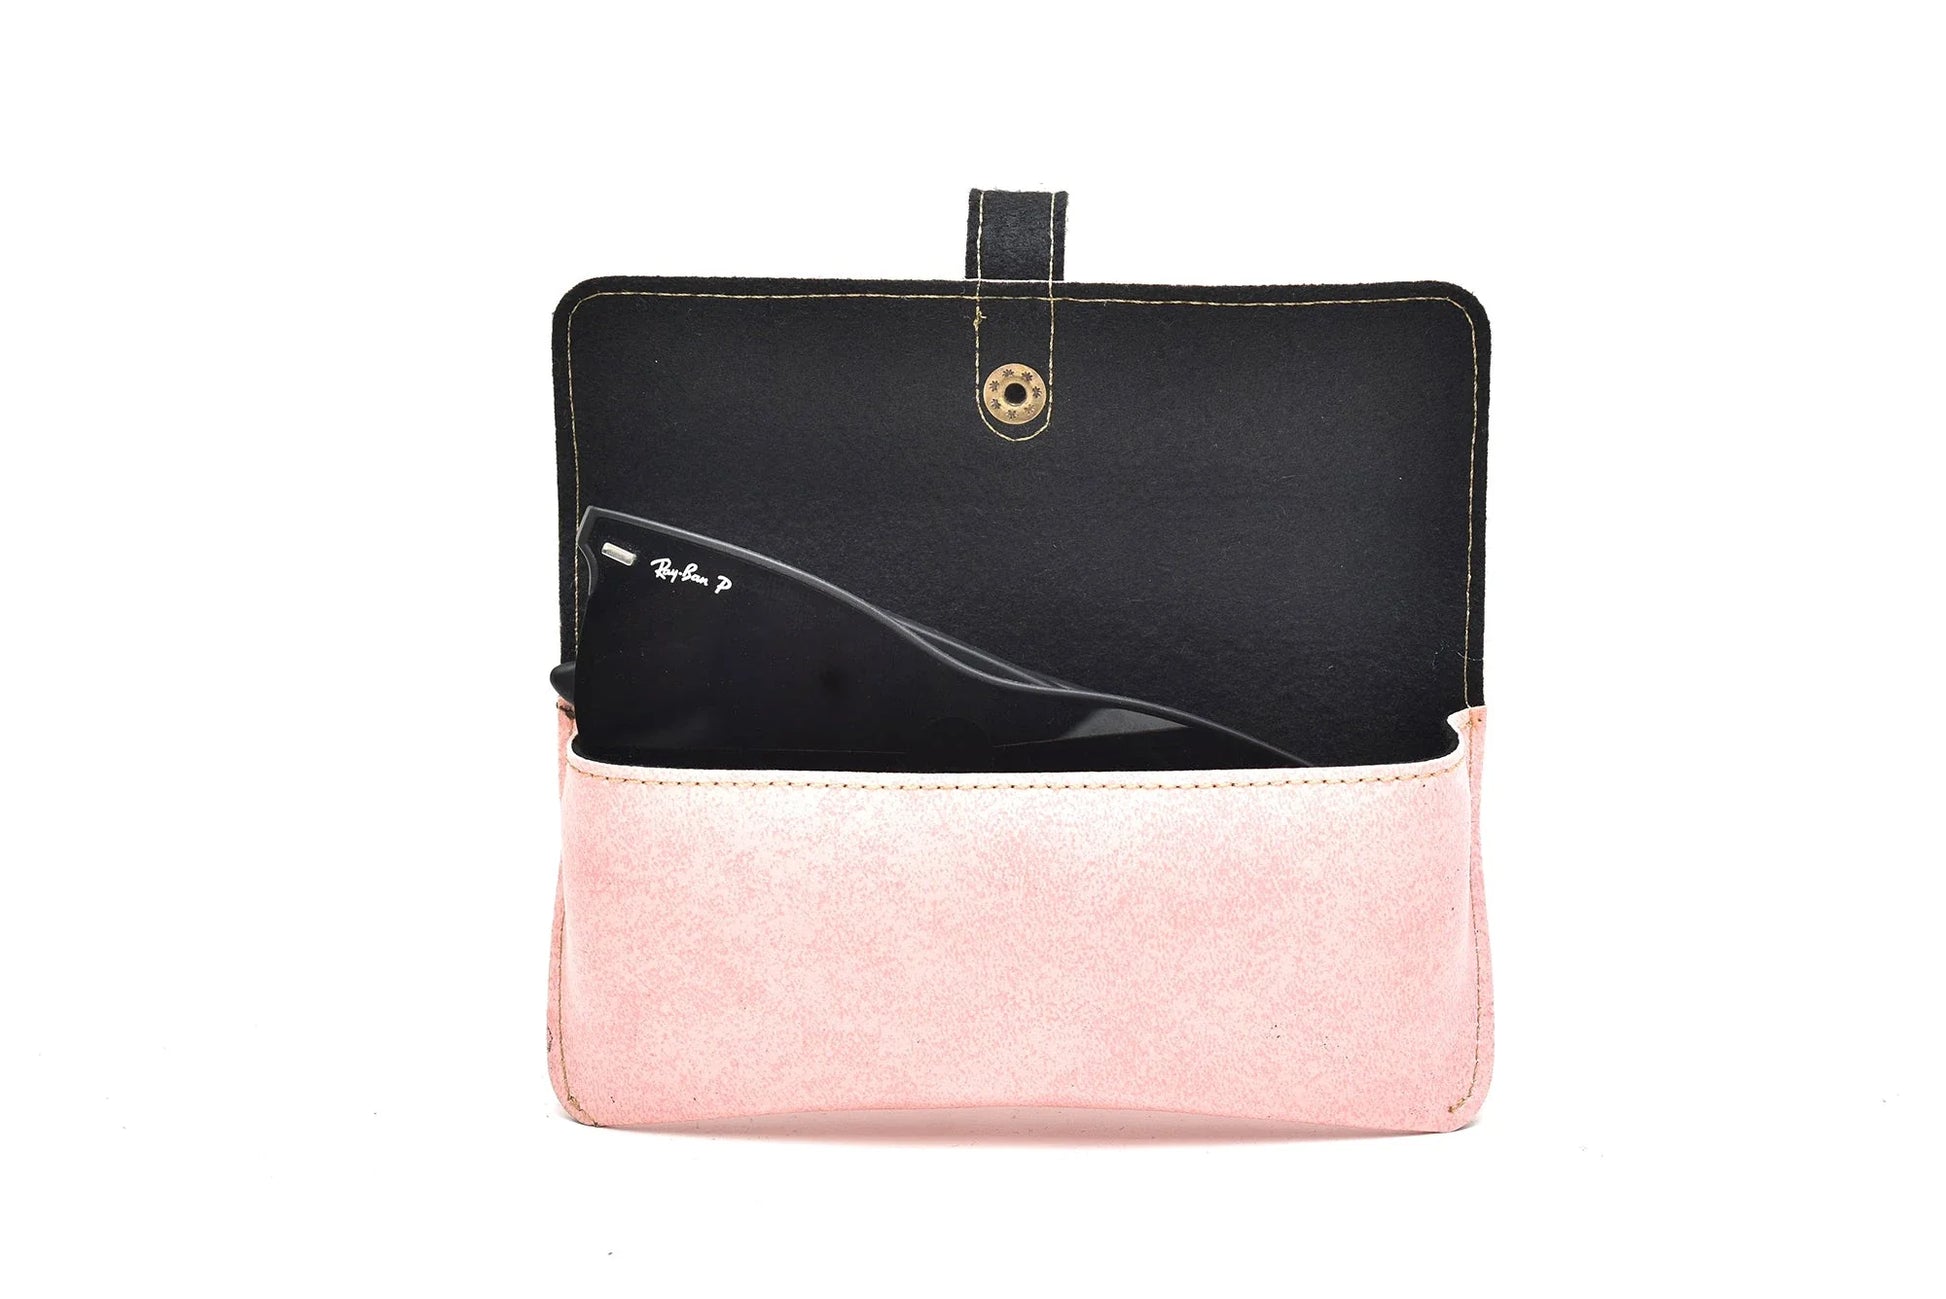 Inside or open view of light pink sunglasses case